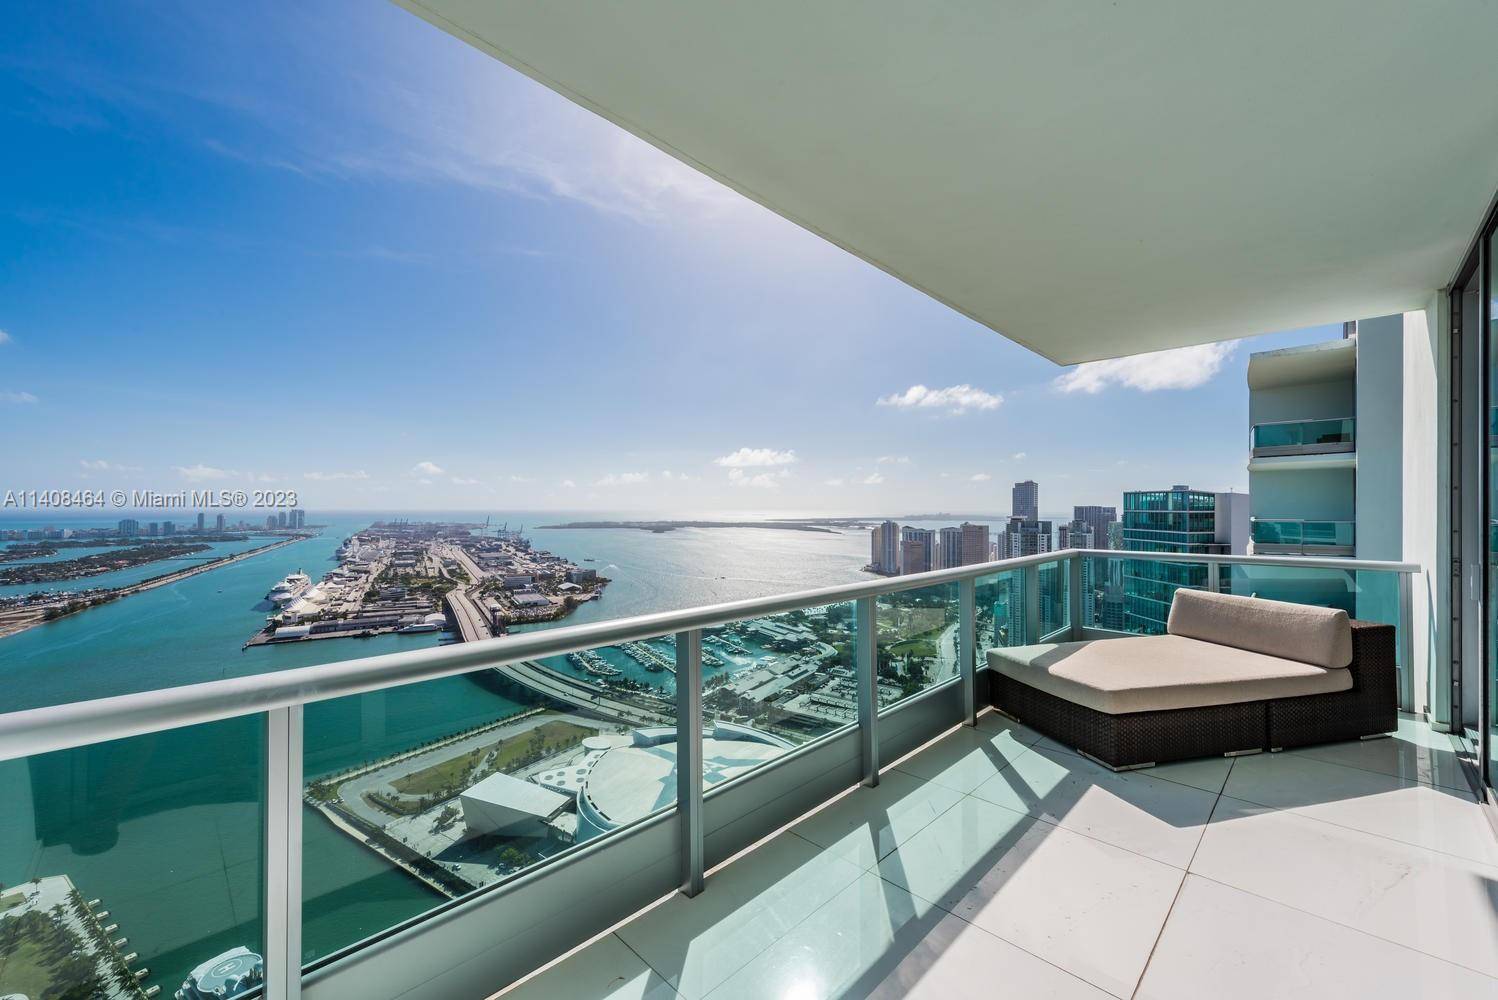 Spectacular Penthouse unit at 900 Biscayne.